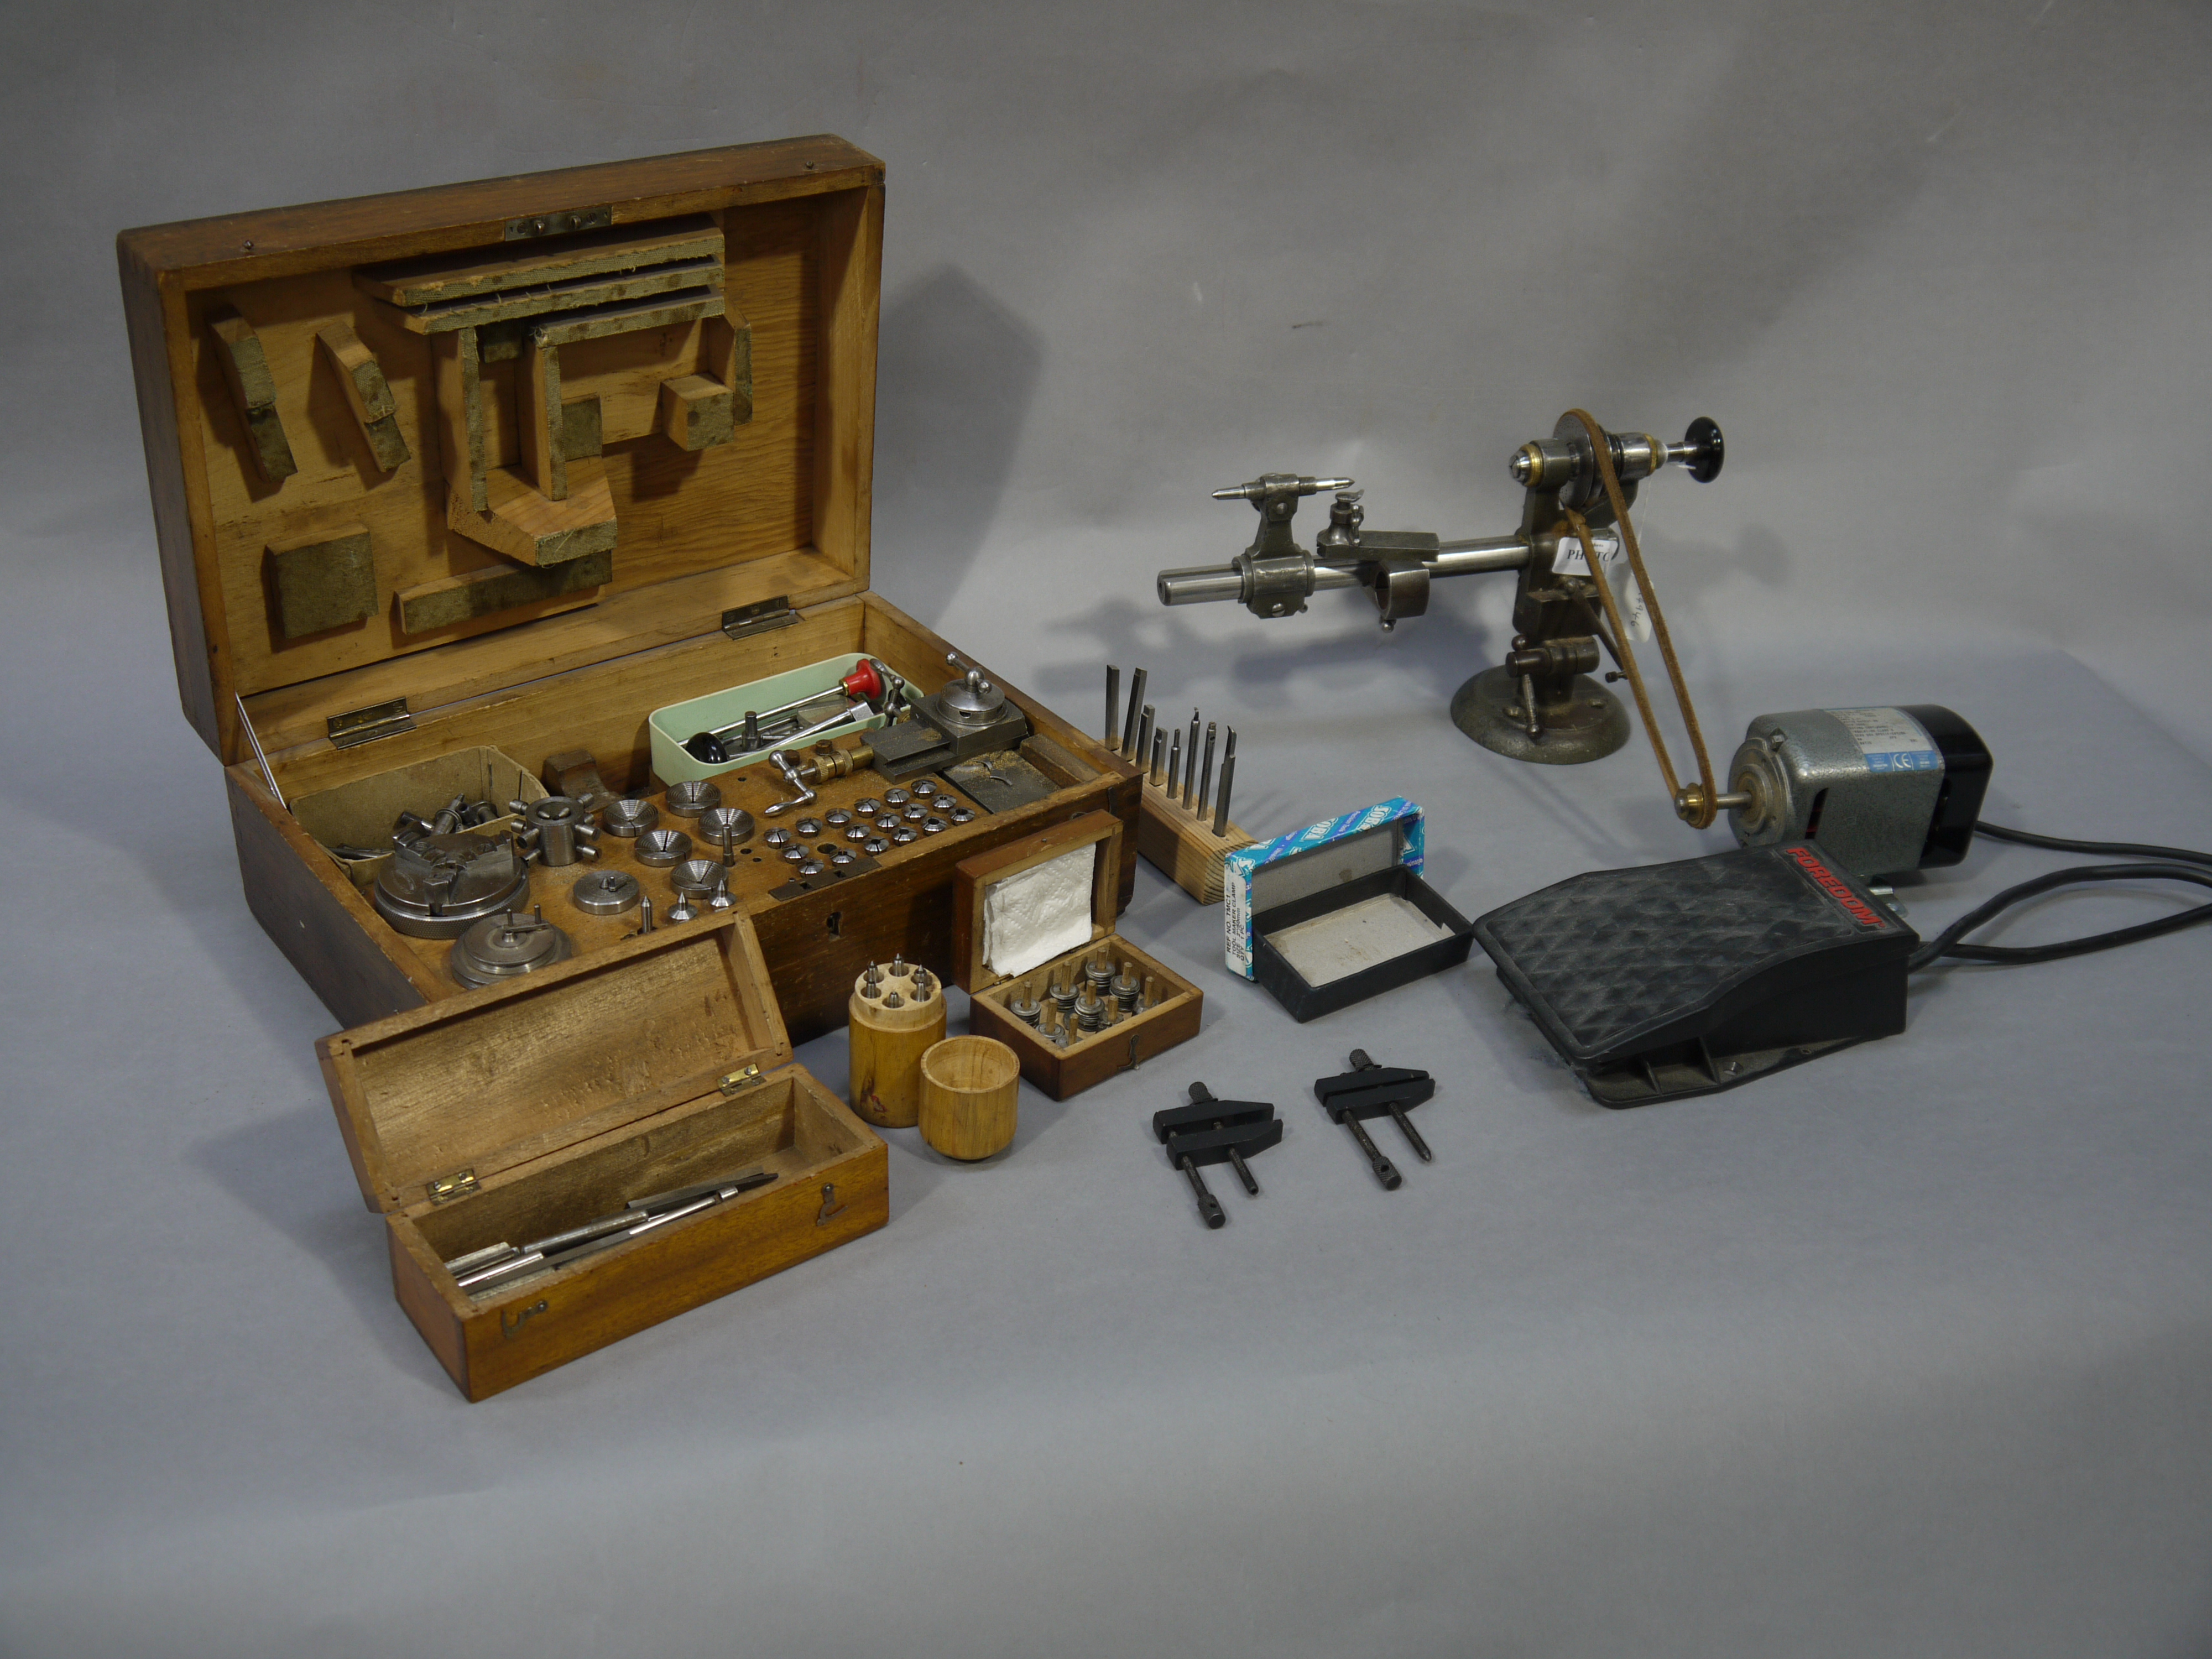 A mid 20th century watch makers lathe complete with bed and chucks, cutting tools,